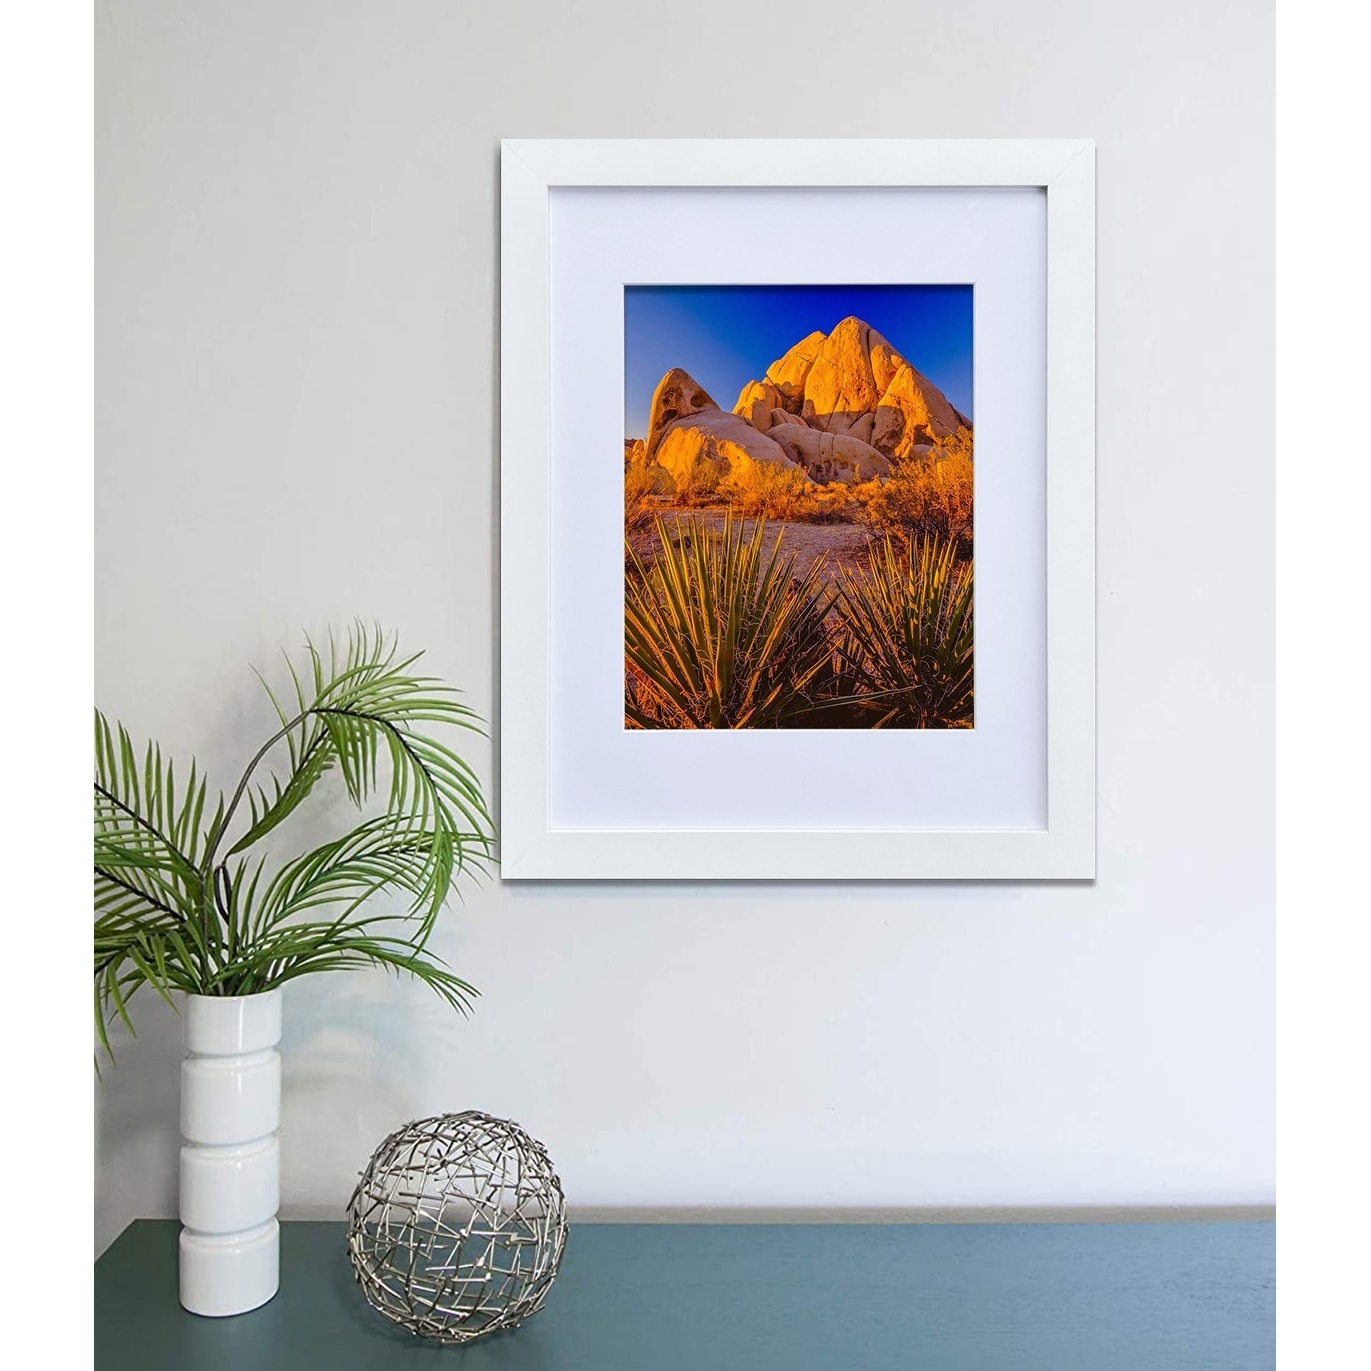 11x14 Mat for 8x10 Photo - Royal Blue Matboard for Frames Measuring 11 x 14  Inches - To Display Art Measuring 8 x 10 Inches - Bed Bath & Beyond -  38871618